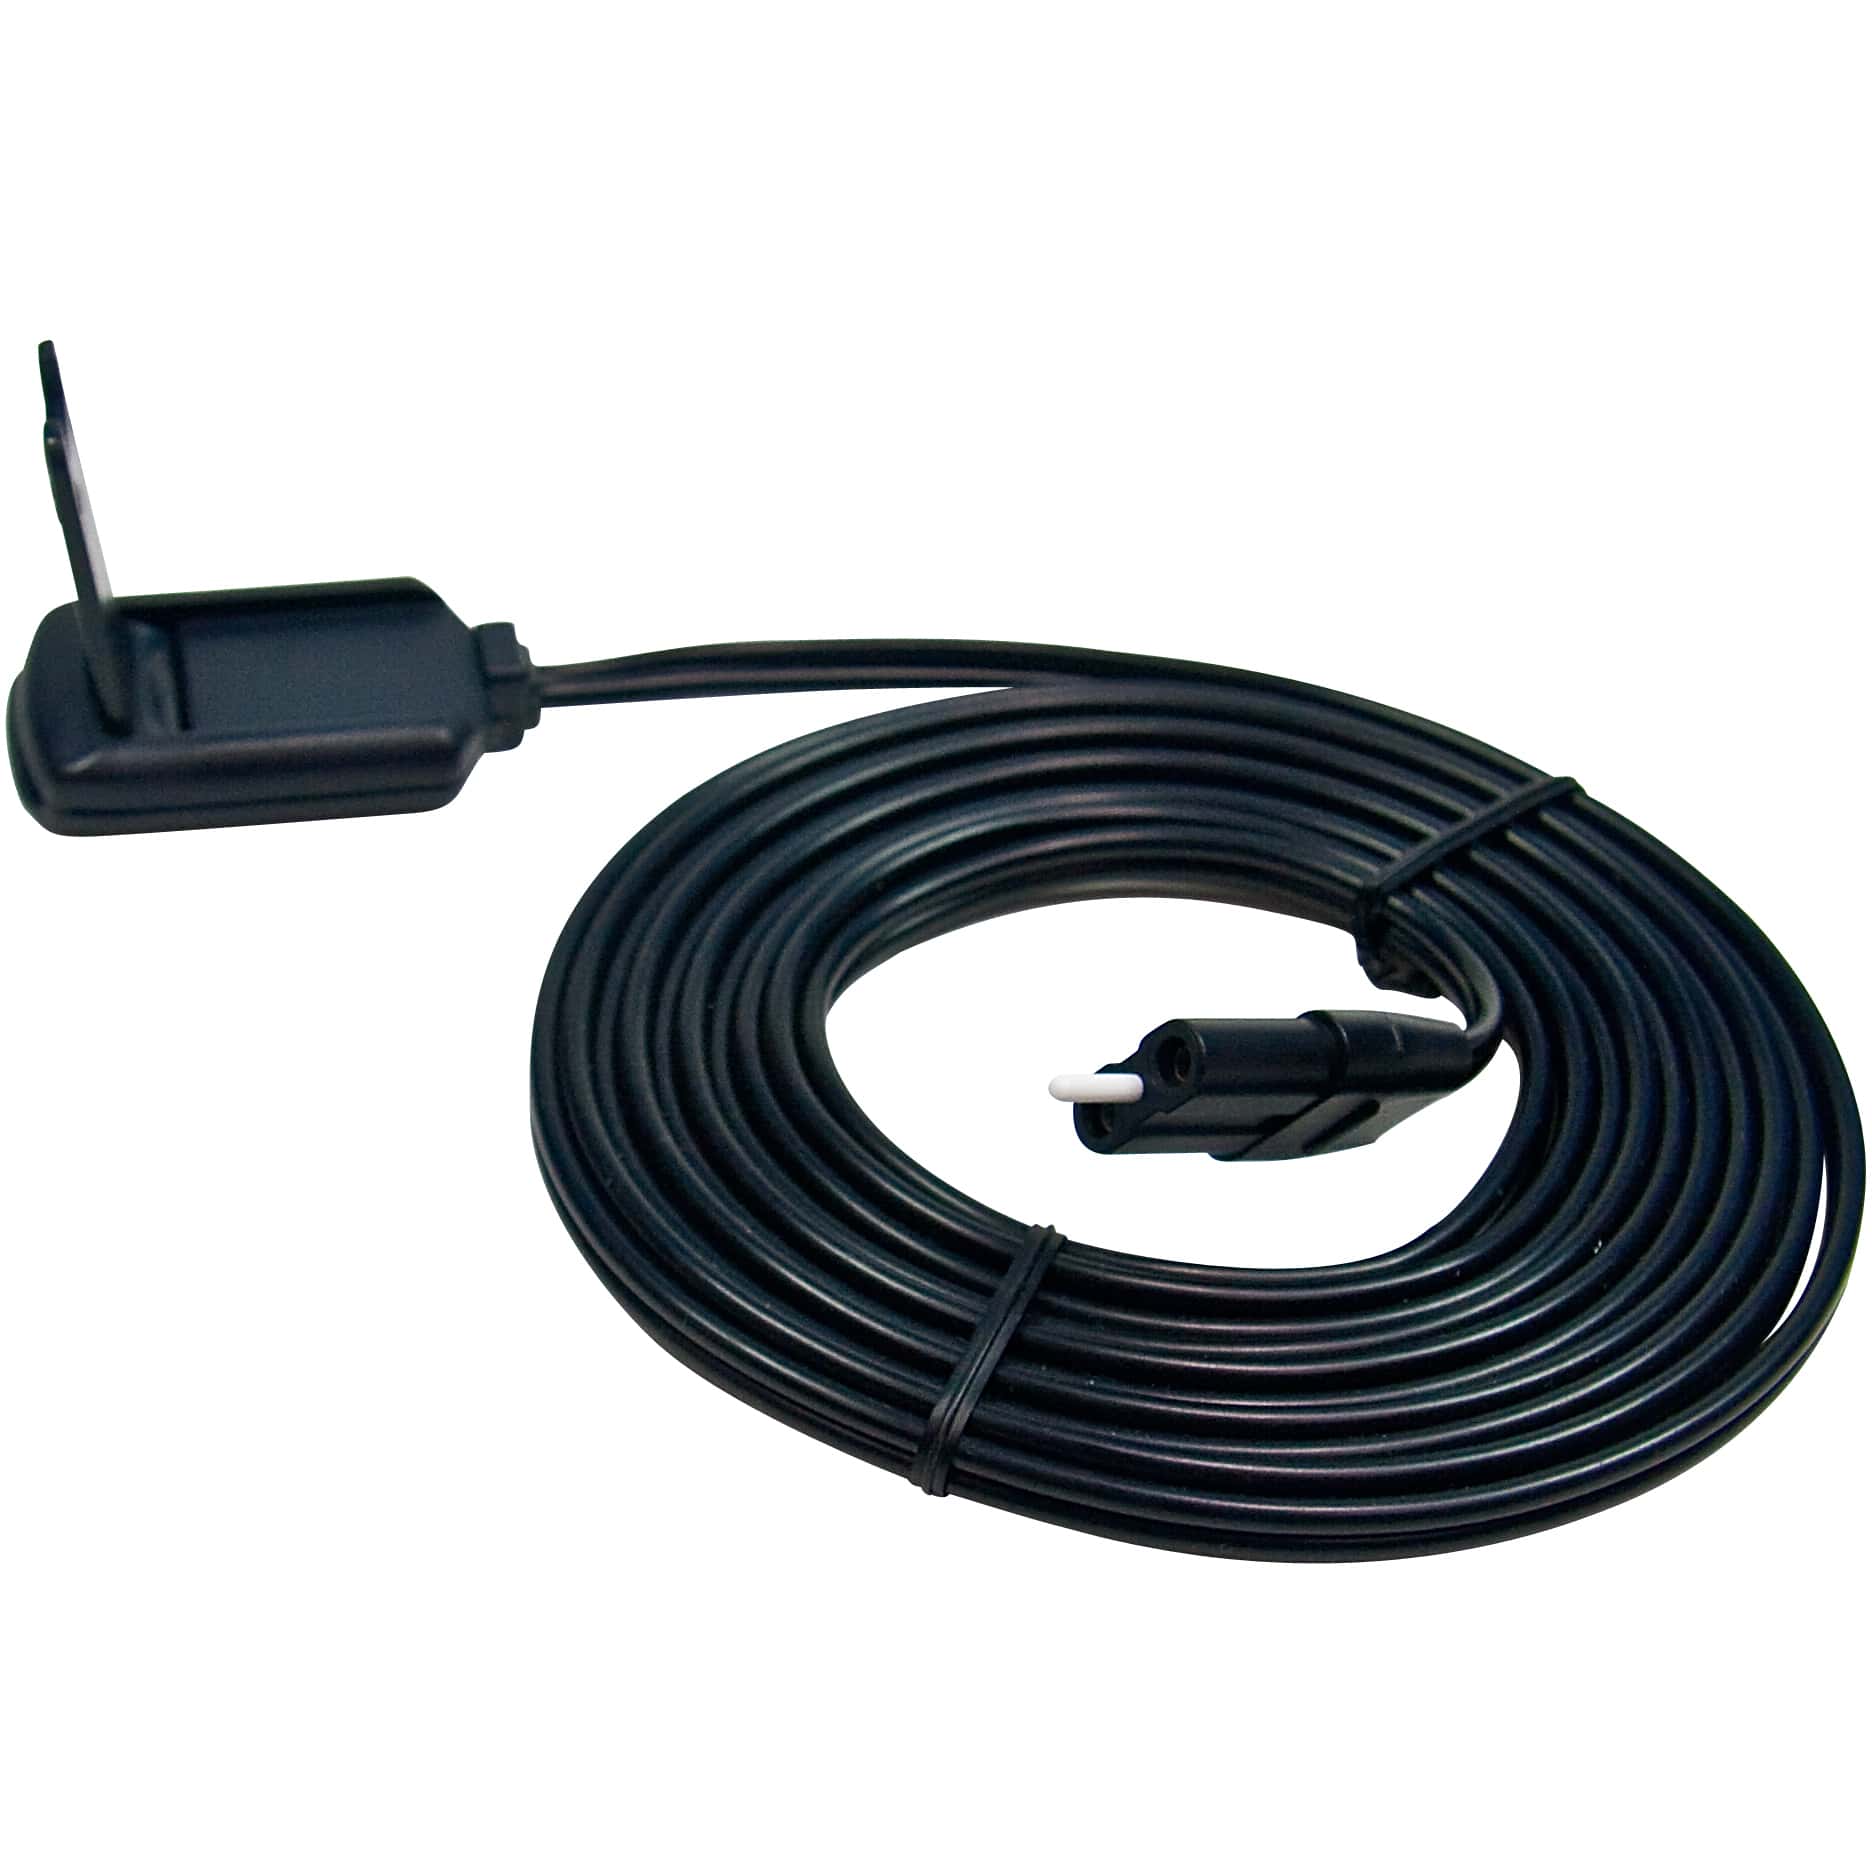 Bovie Reusable Grounding Cable